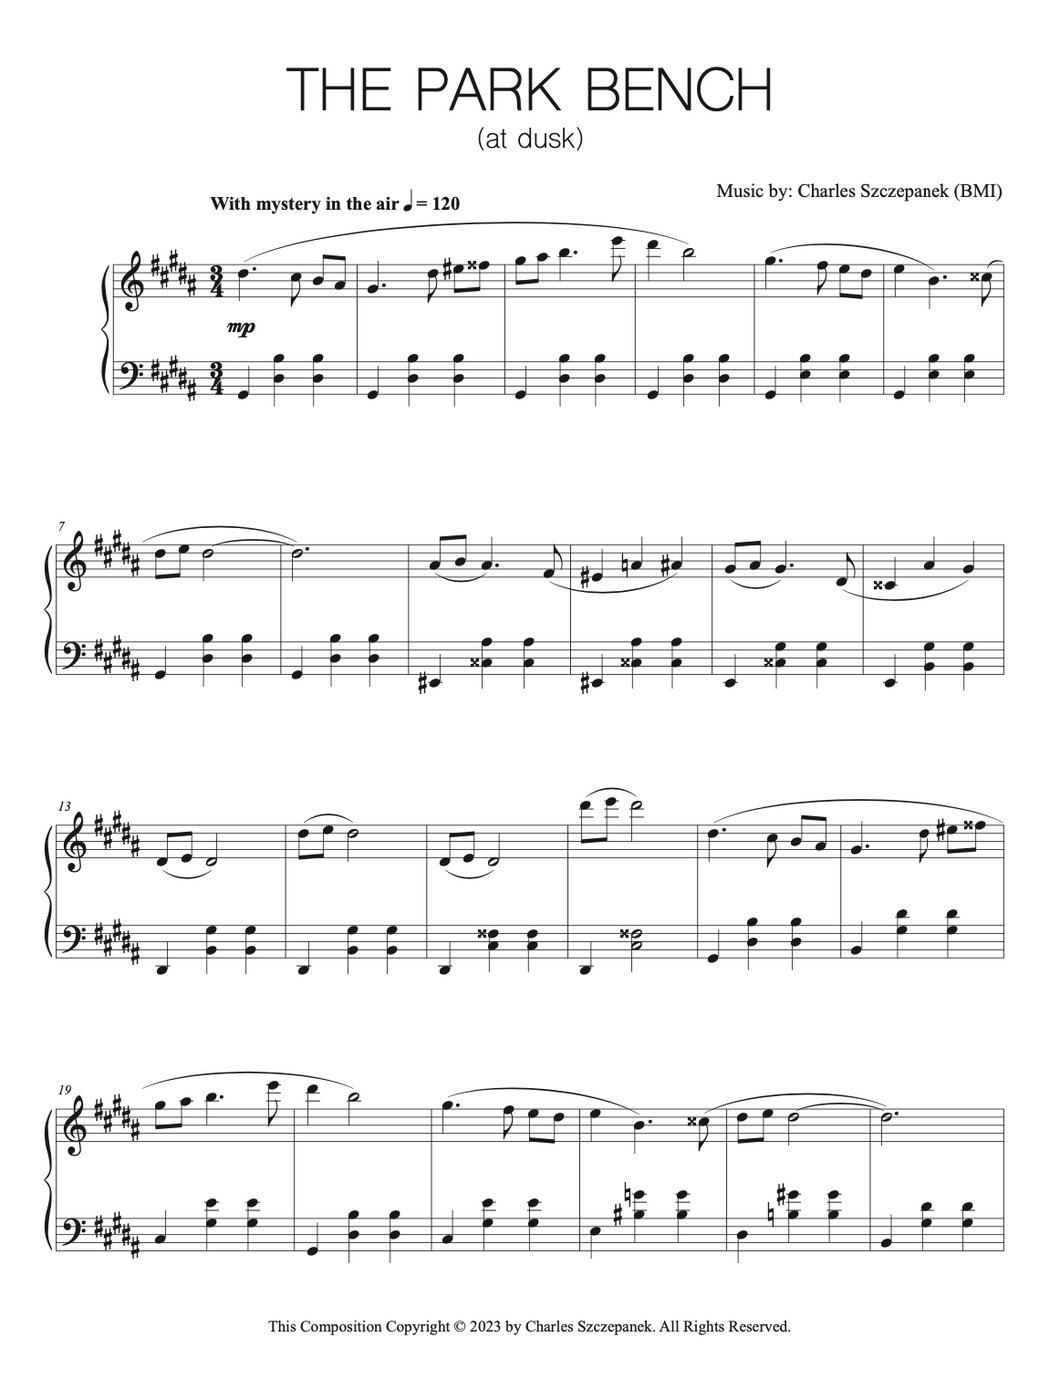 The Park Bench (dusk) - Sheet Music for Solo Piano